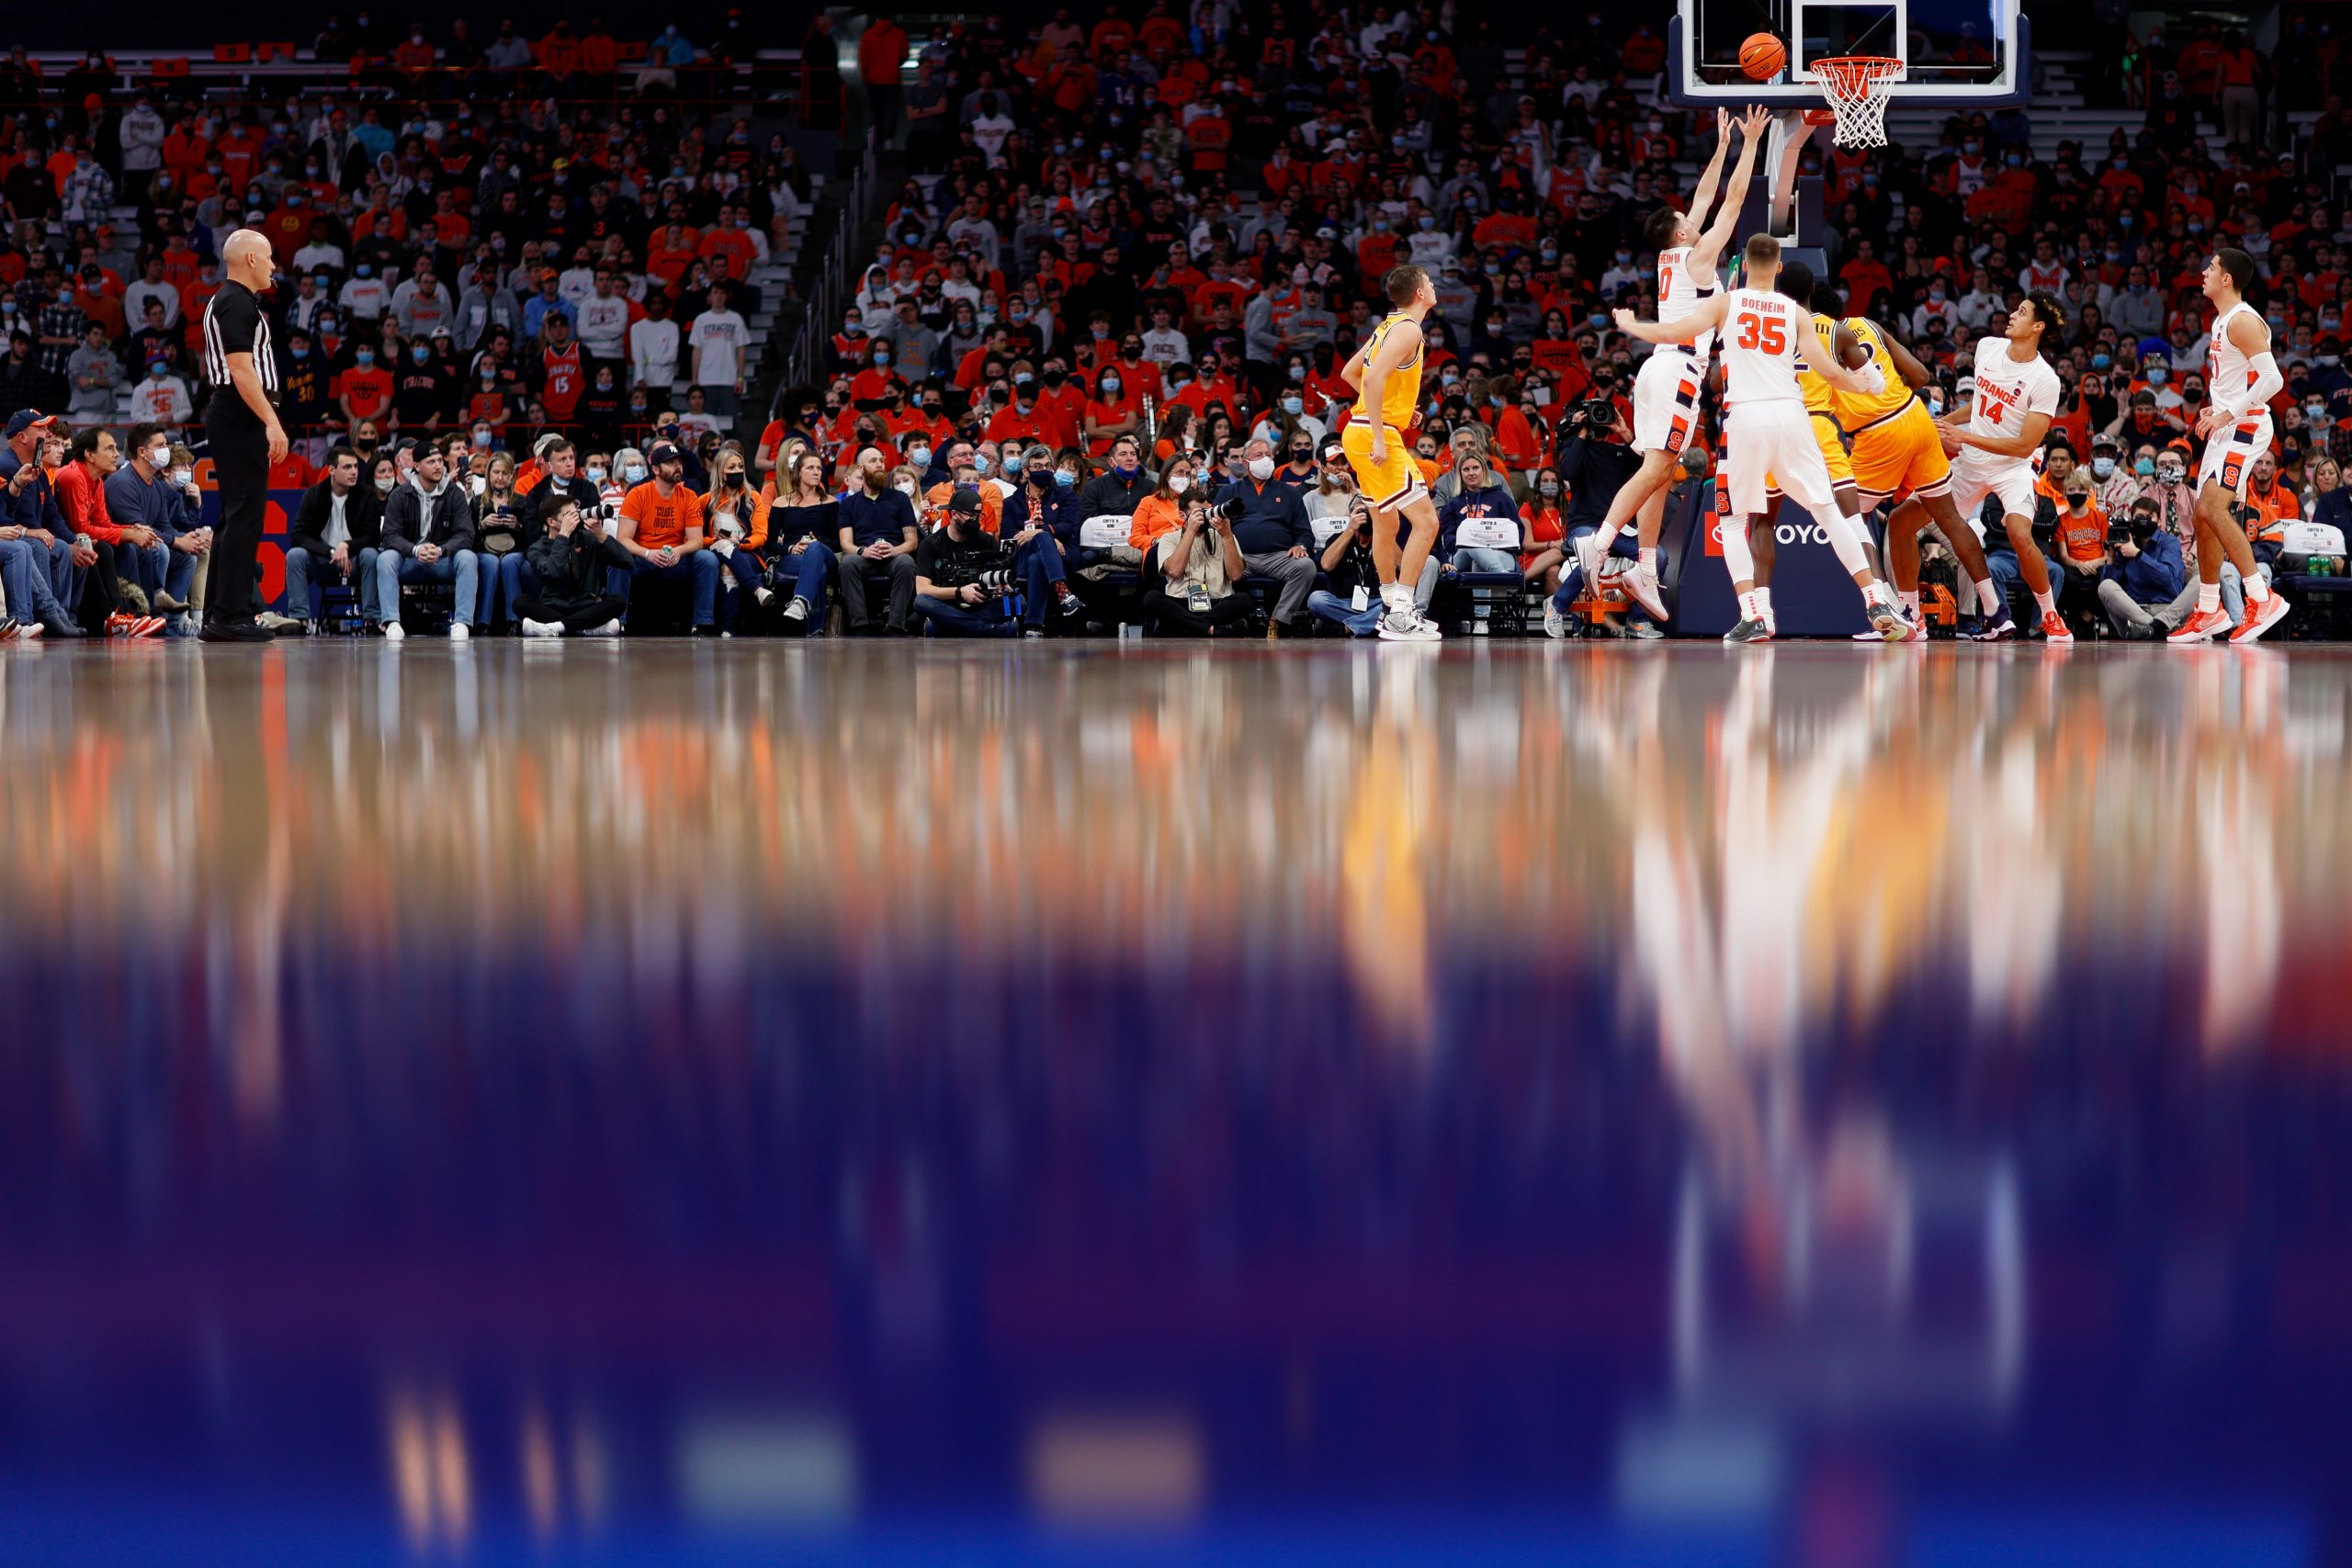 Syracuse forward Jimmy Boeheim rises for a rebound through the glossy floor at The Dome in Syracuse's win over Drexel on Sunday night.